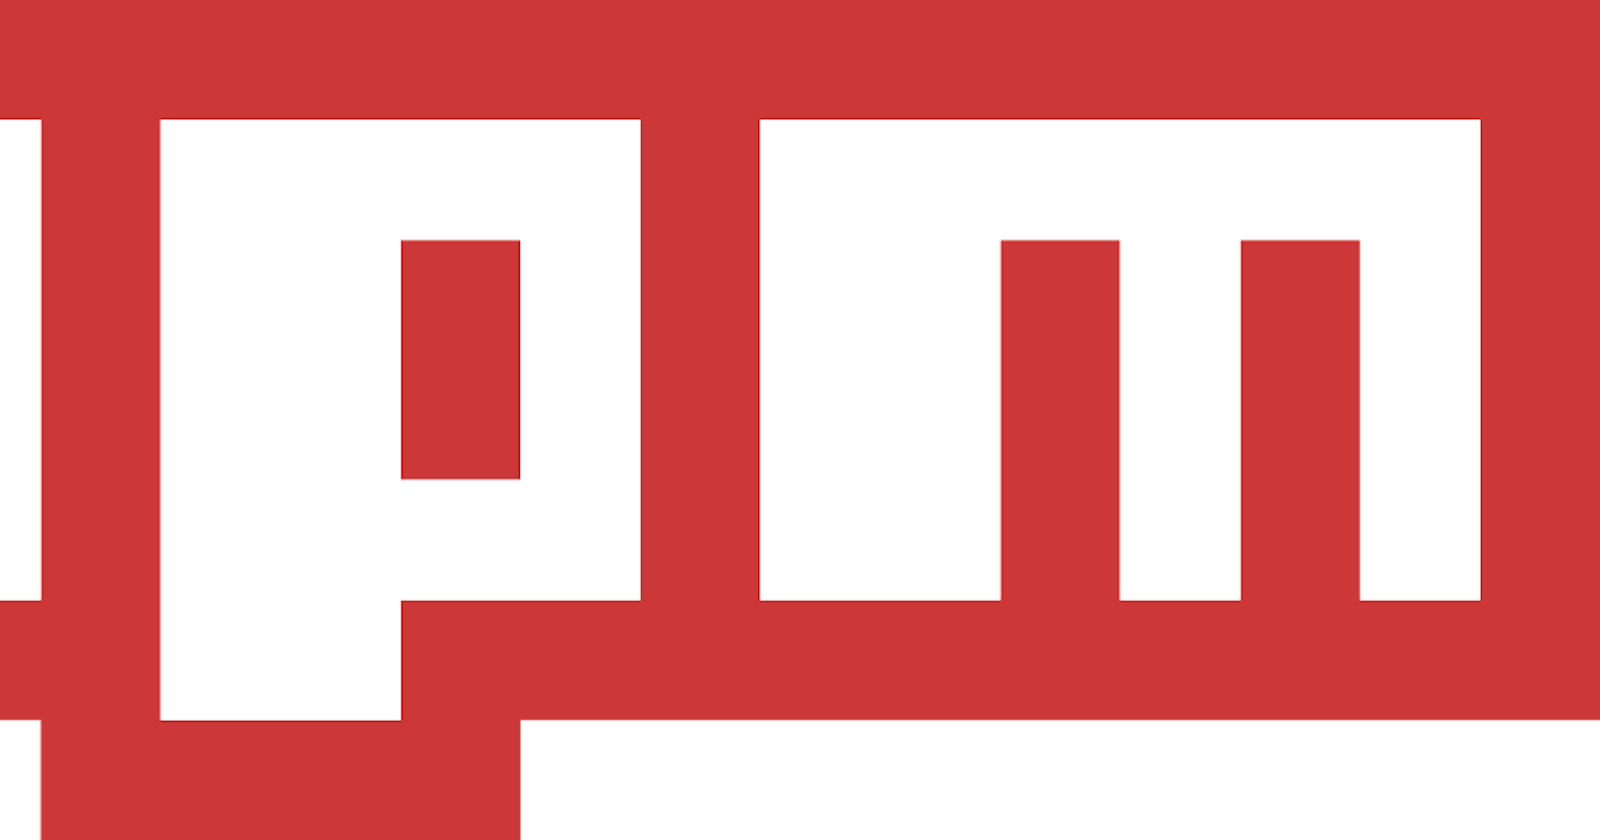 How to write and publish your first NPM package